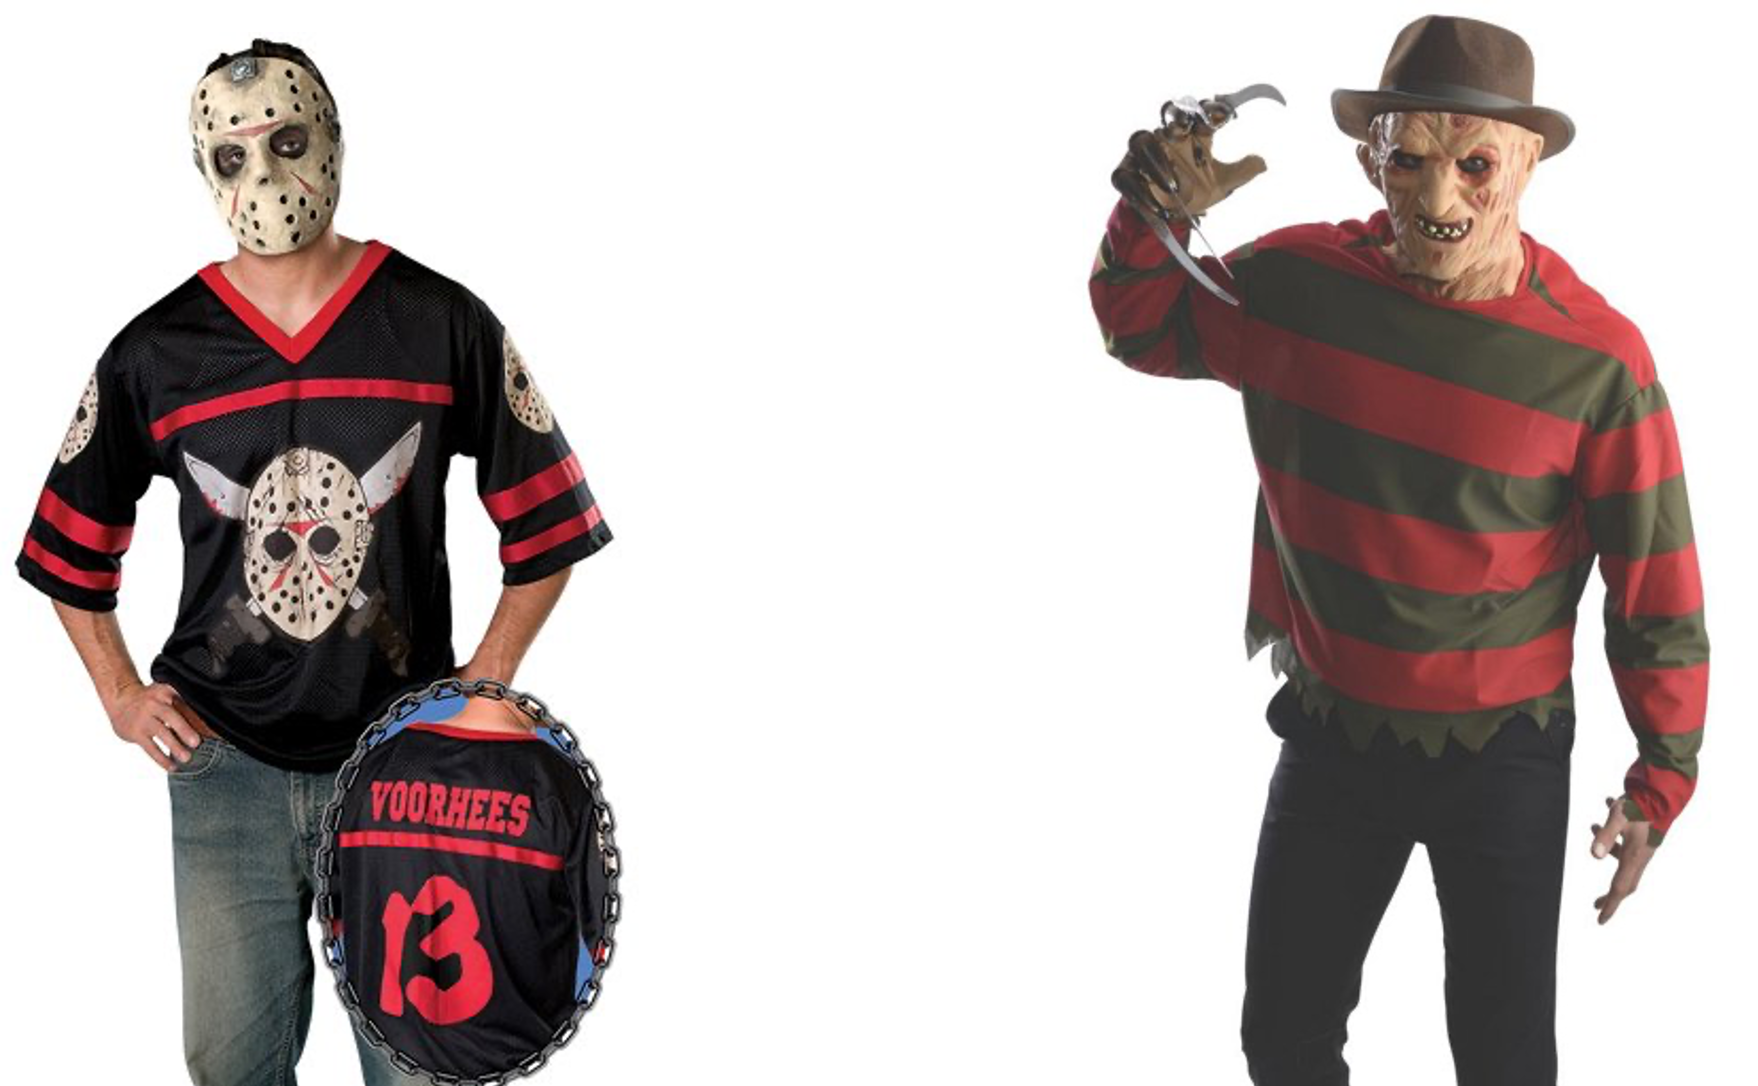 Jason and Freddy costumes